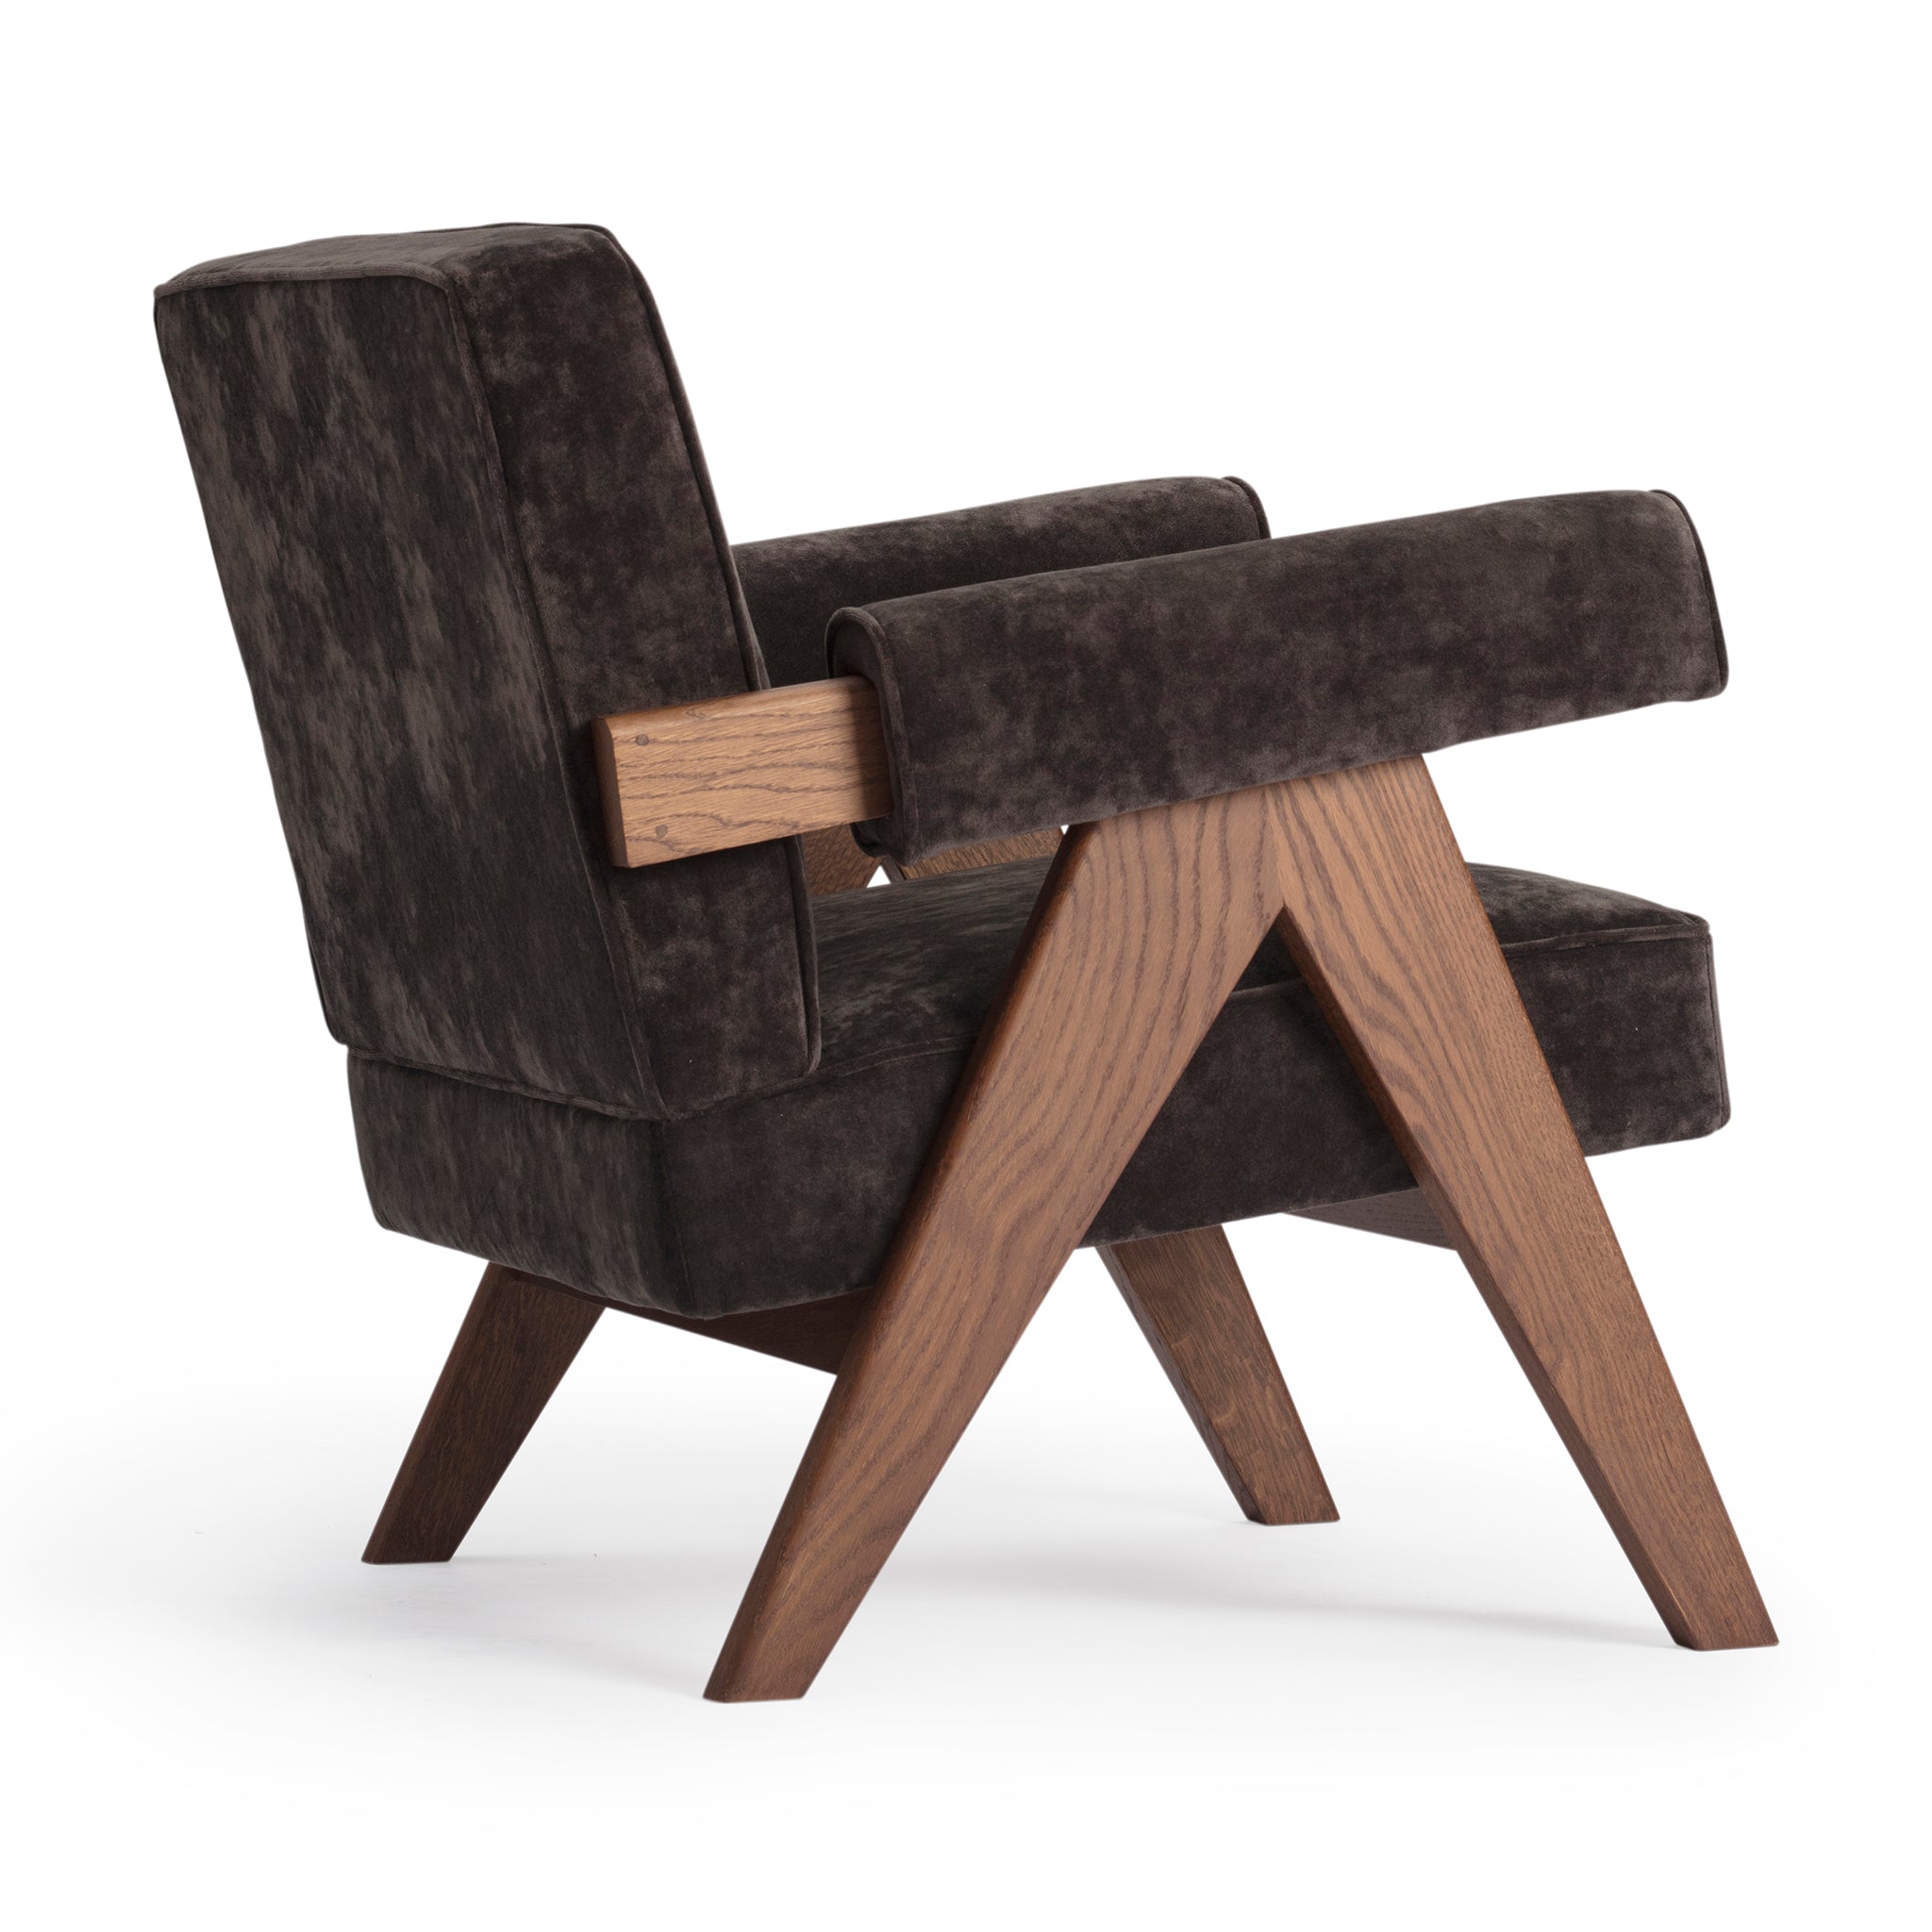 Back view of an authentic chandigarh lounge chair, pierre jeanneret era, walnut oak frame, chocolate brown mohair upholstery, by Klarel #K35-15